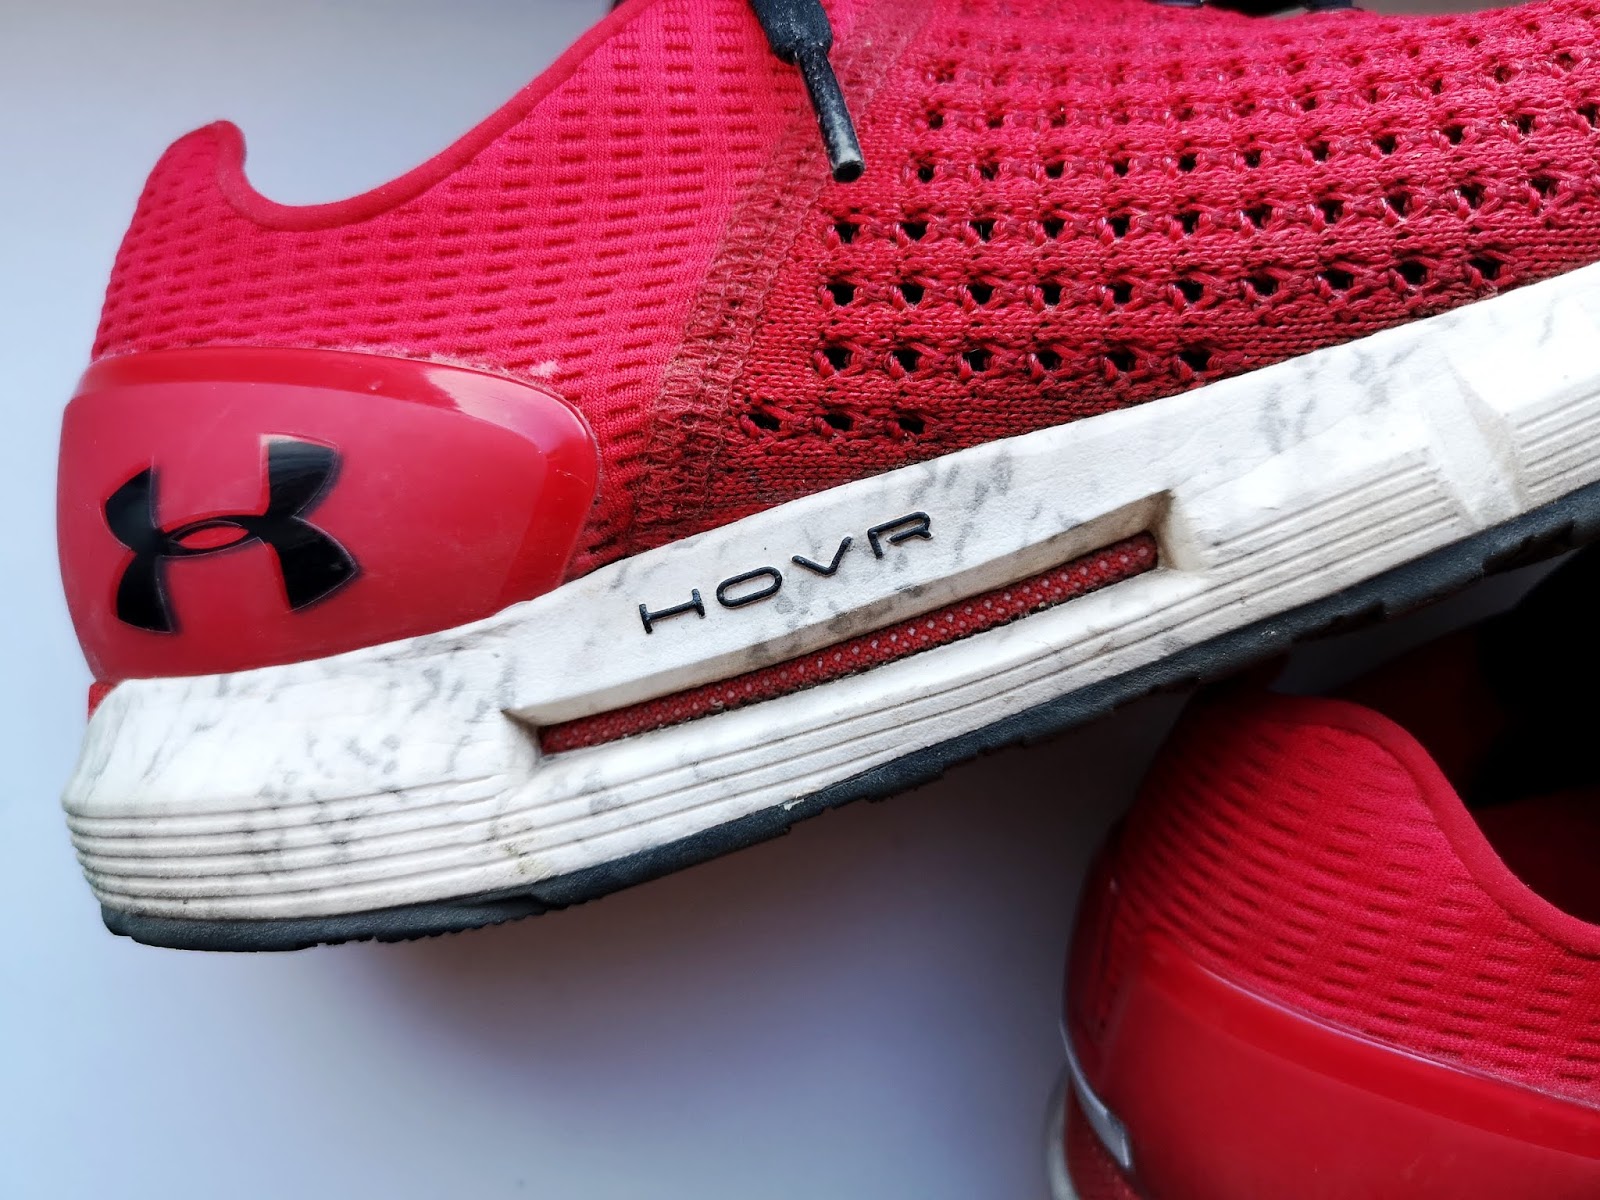 Under armour hovr sonic 6. Кроссовки under Armour HOVR. Ua HOVR Sonic. Ua HOVR Sonic 3. Кроссовки under Armour Curry HOVR Splash.